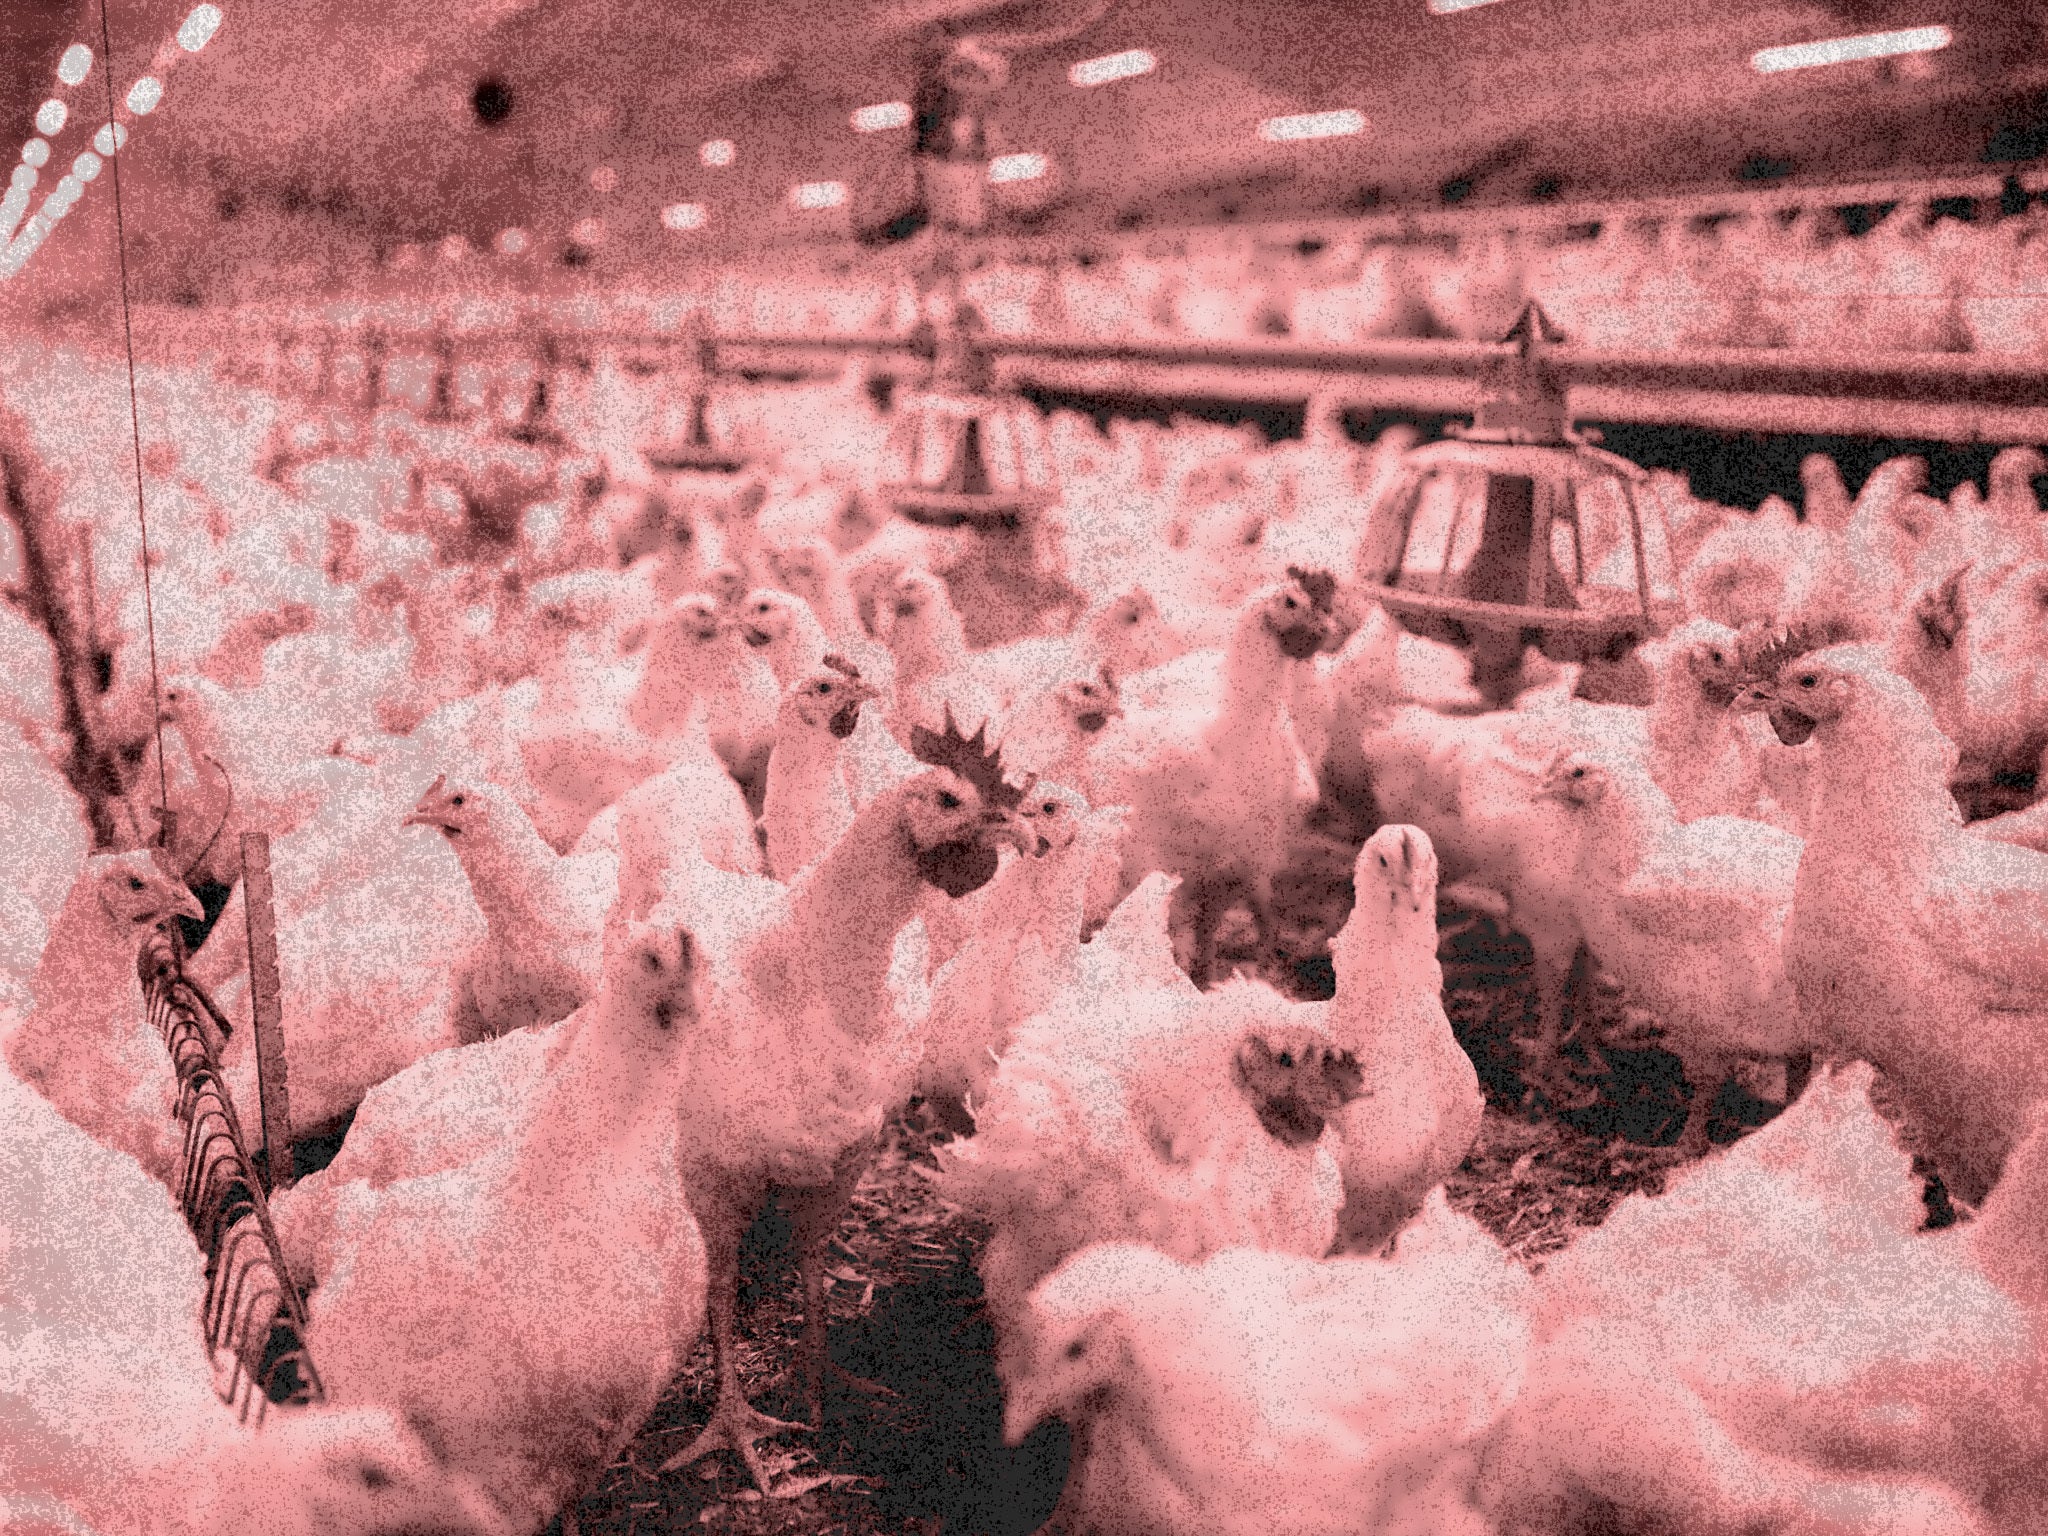 Workers in chicken sheds say they had experienced flashbacks from watching the birds die in extreme heat